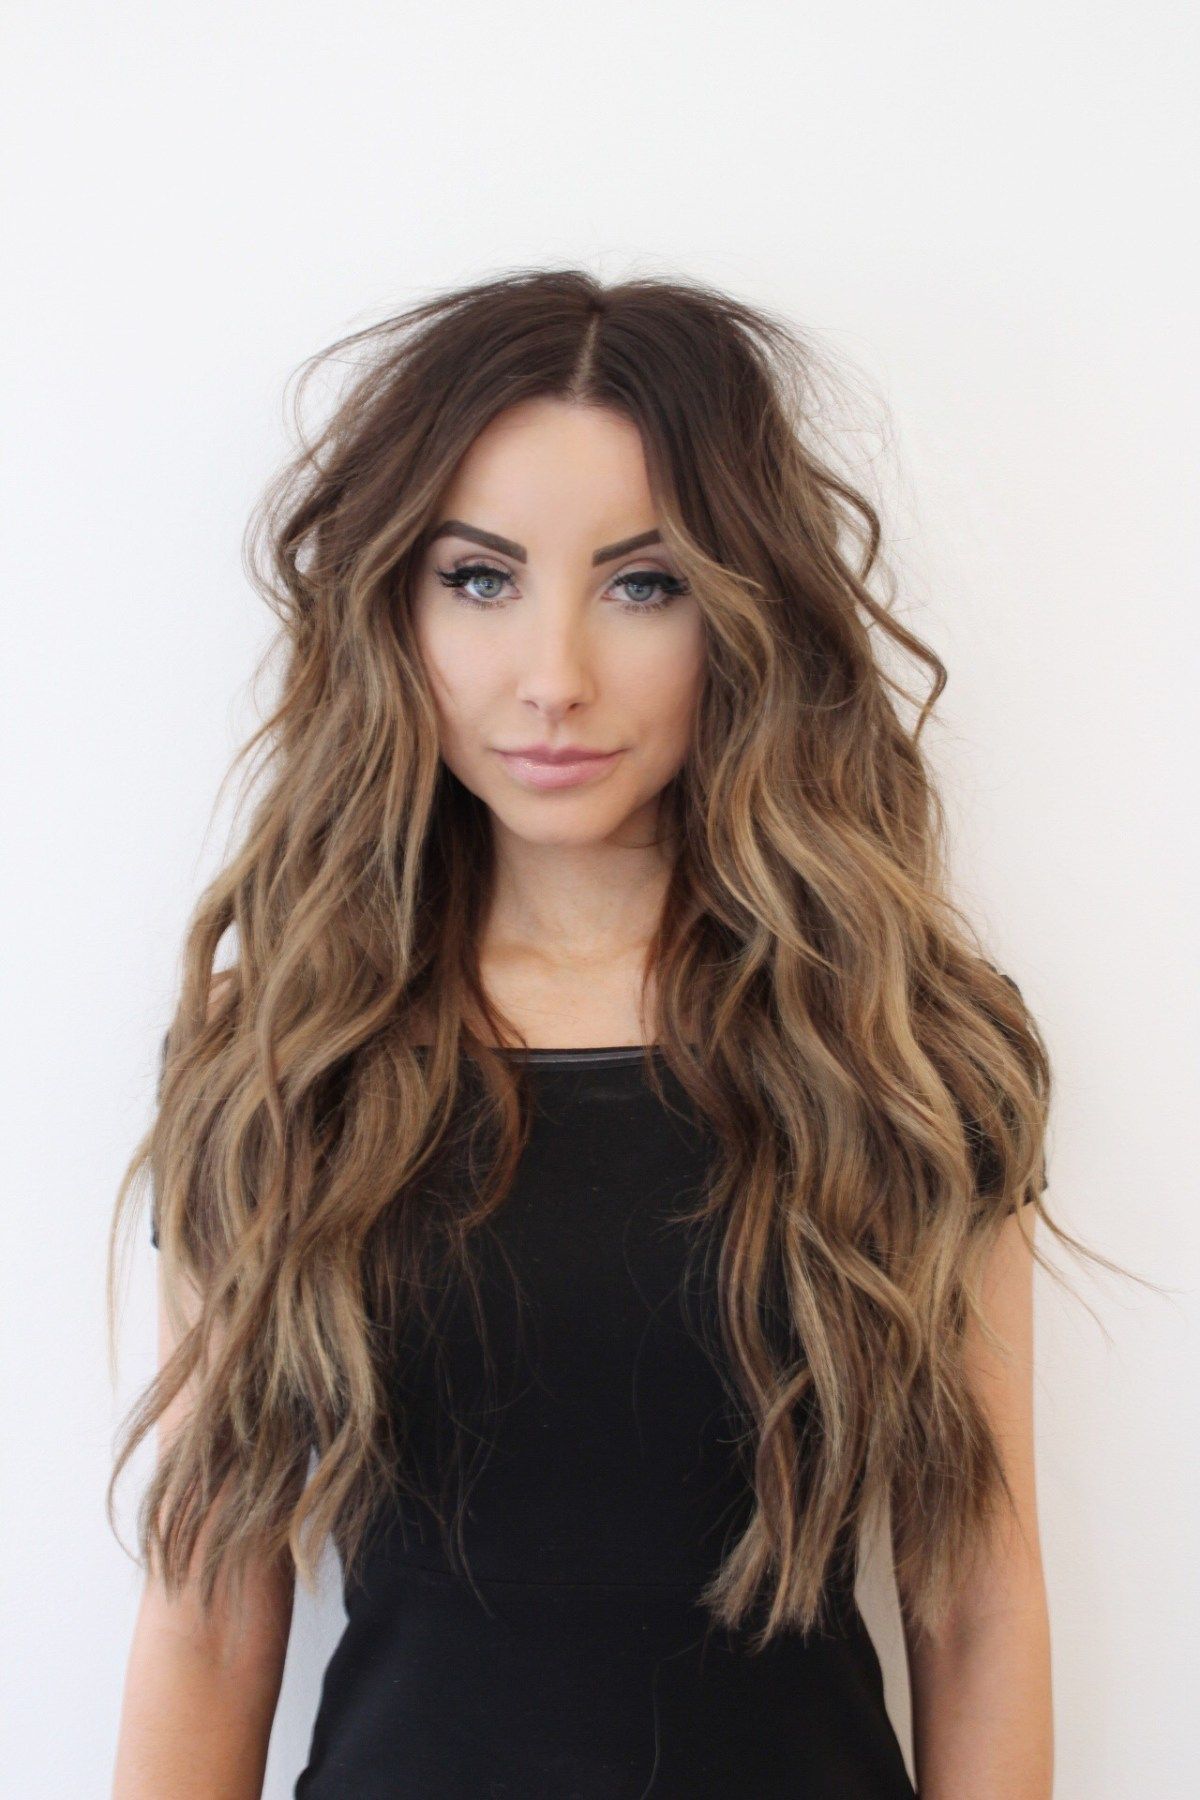 16 hair Waves how to get ideas